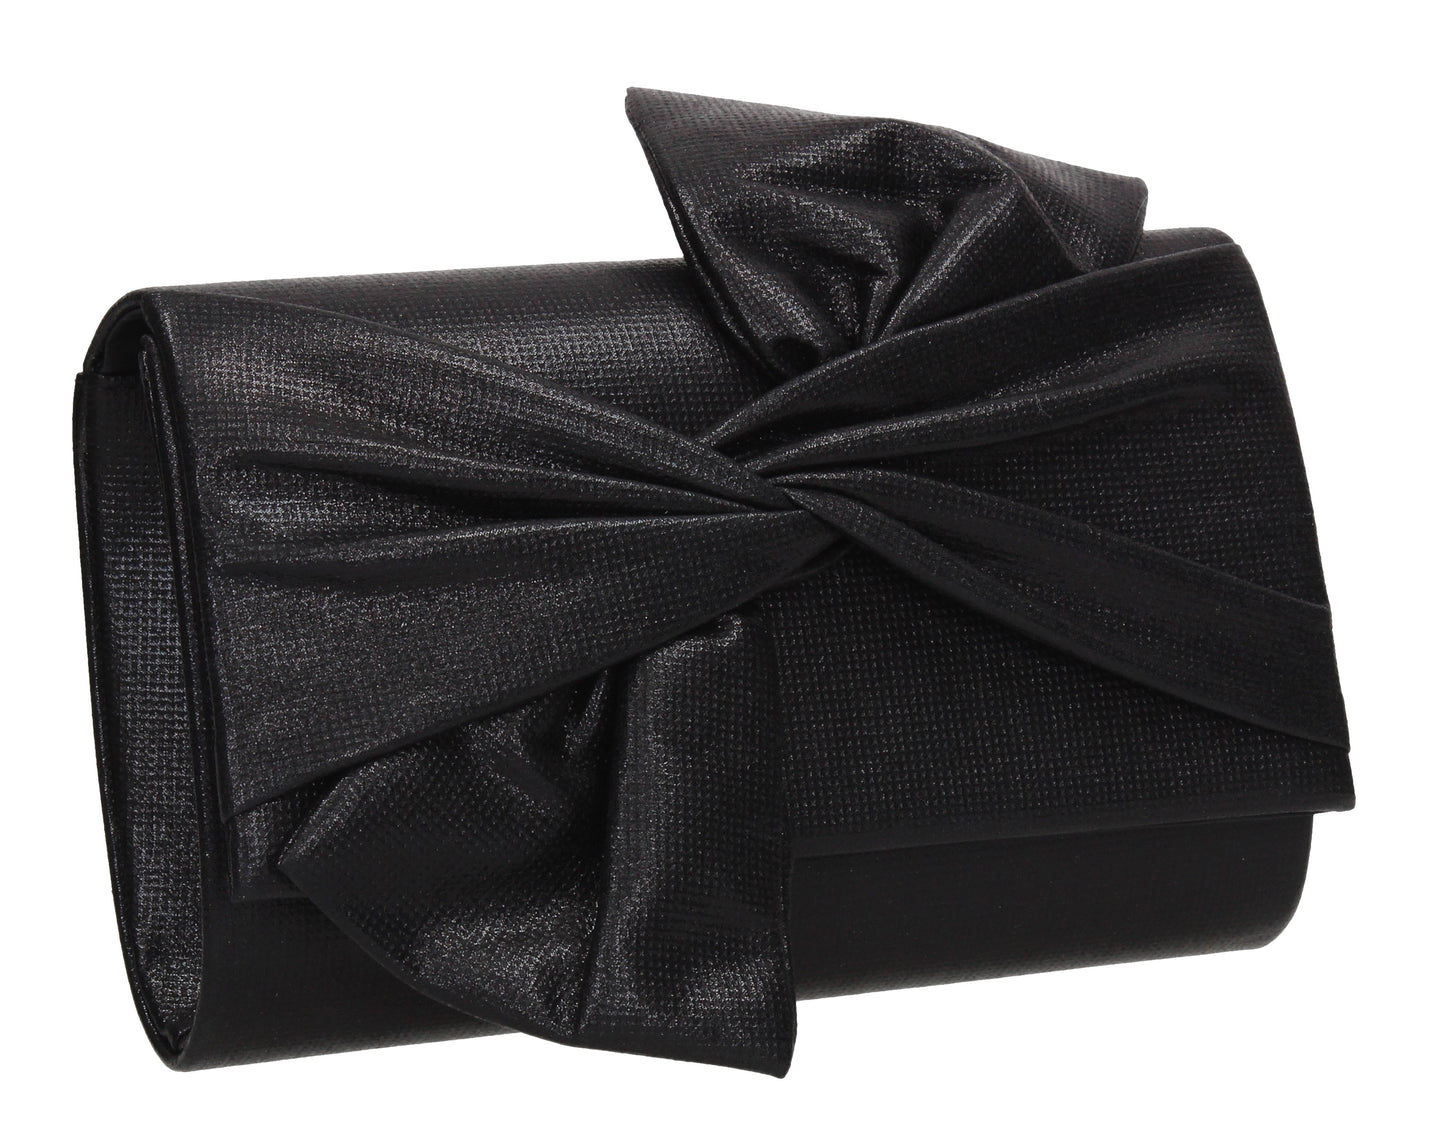 June Bow Style Clutch Bag Black